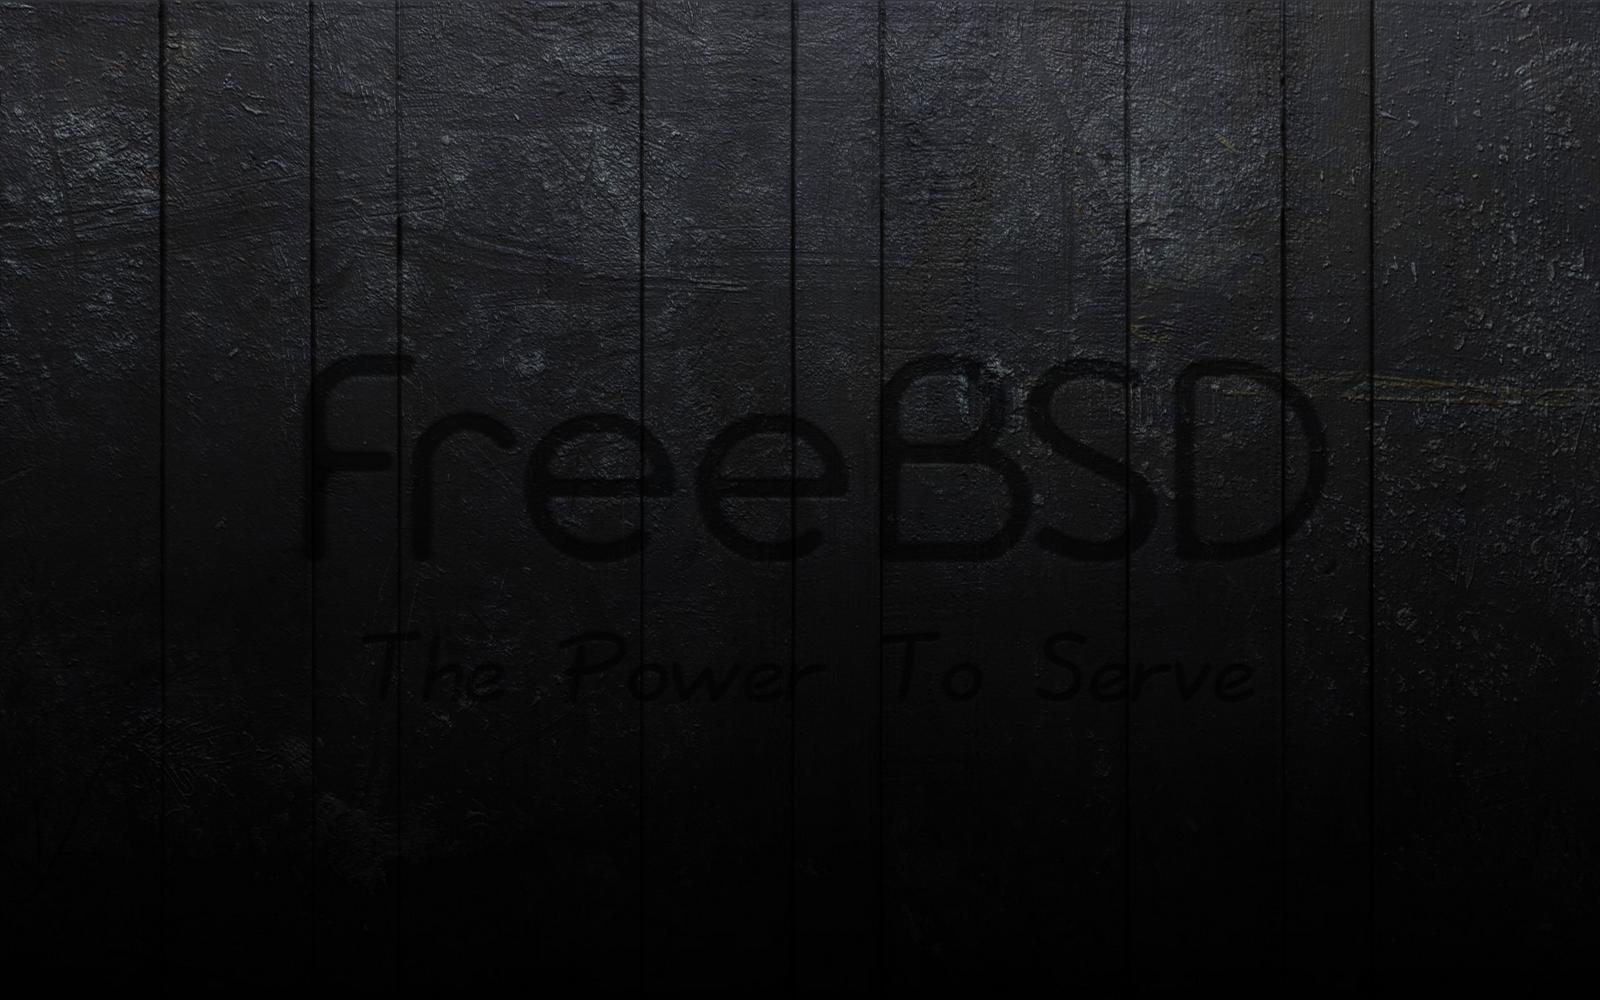 FreeBSD Wallpapers - Wallpaper Cave